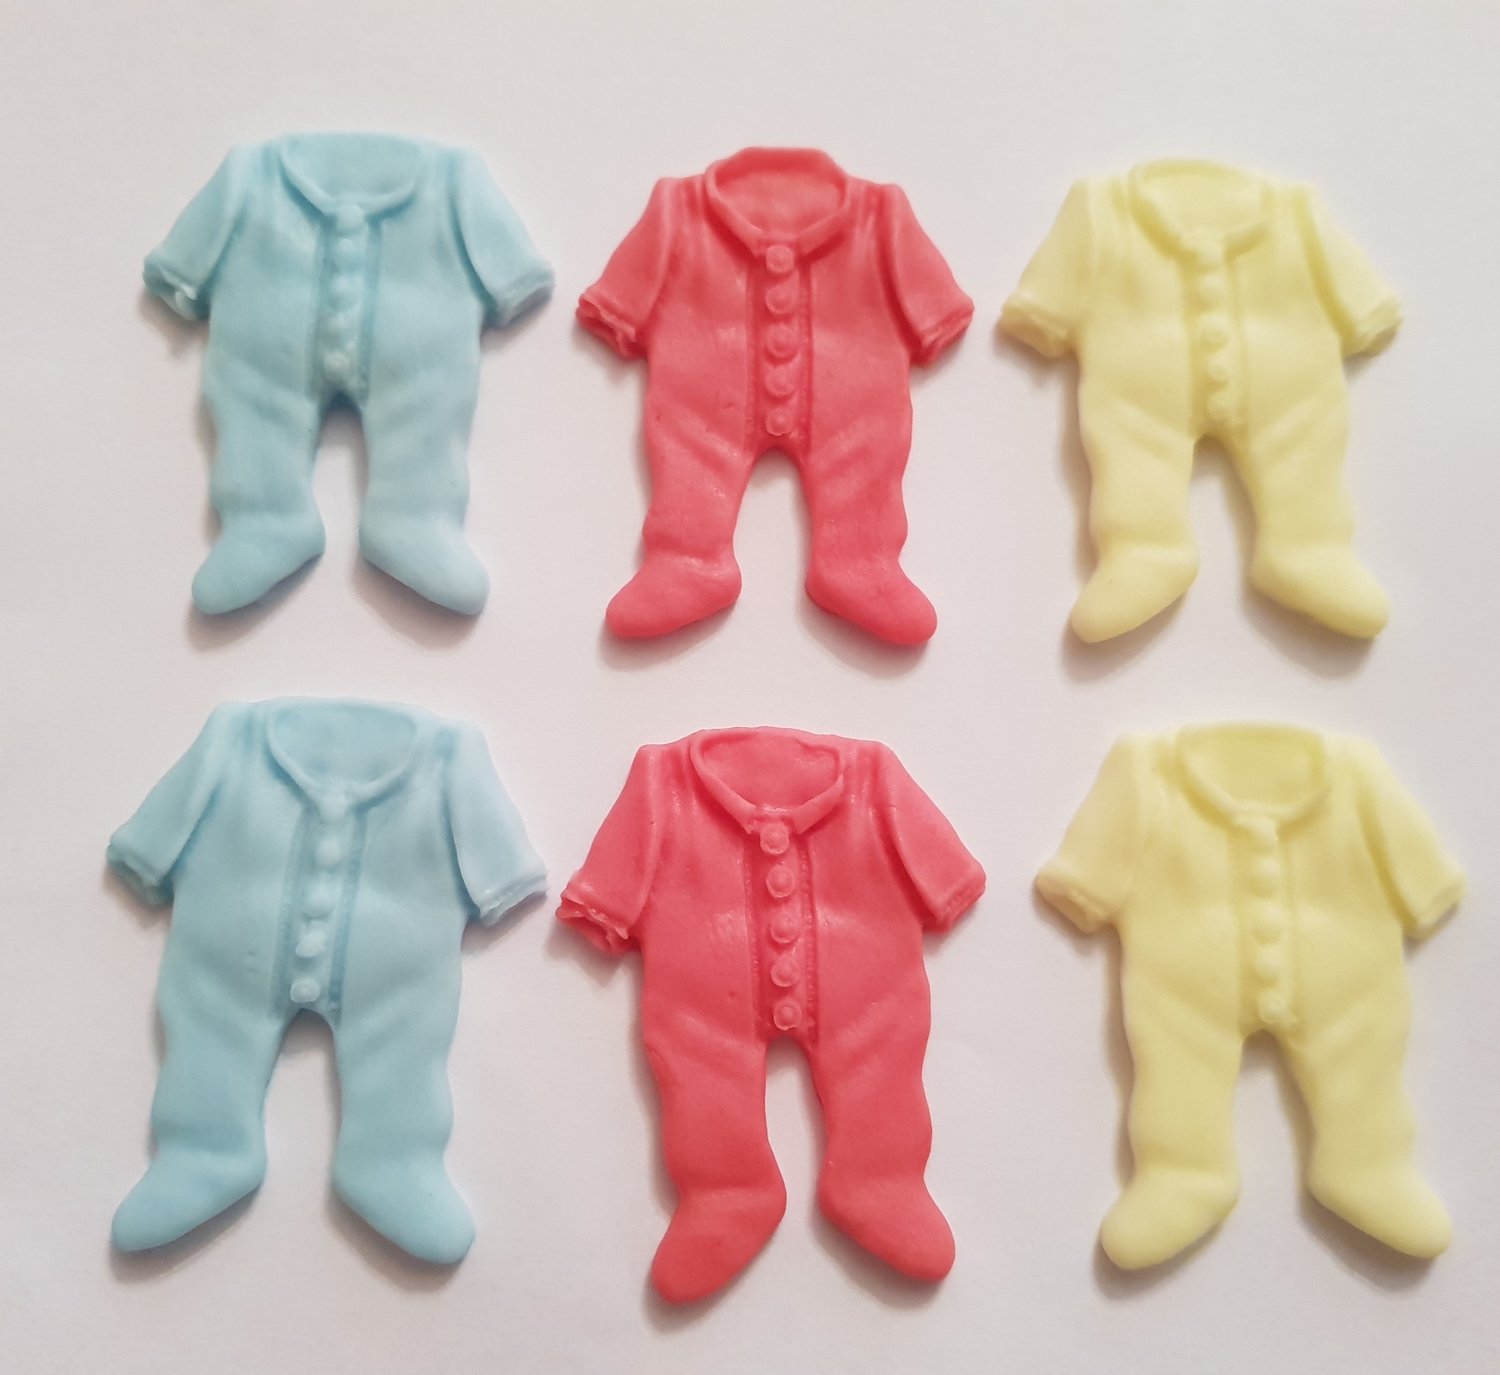 6 BABY GROWS EDIBLE CAKE TOPPERS